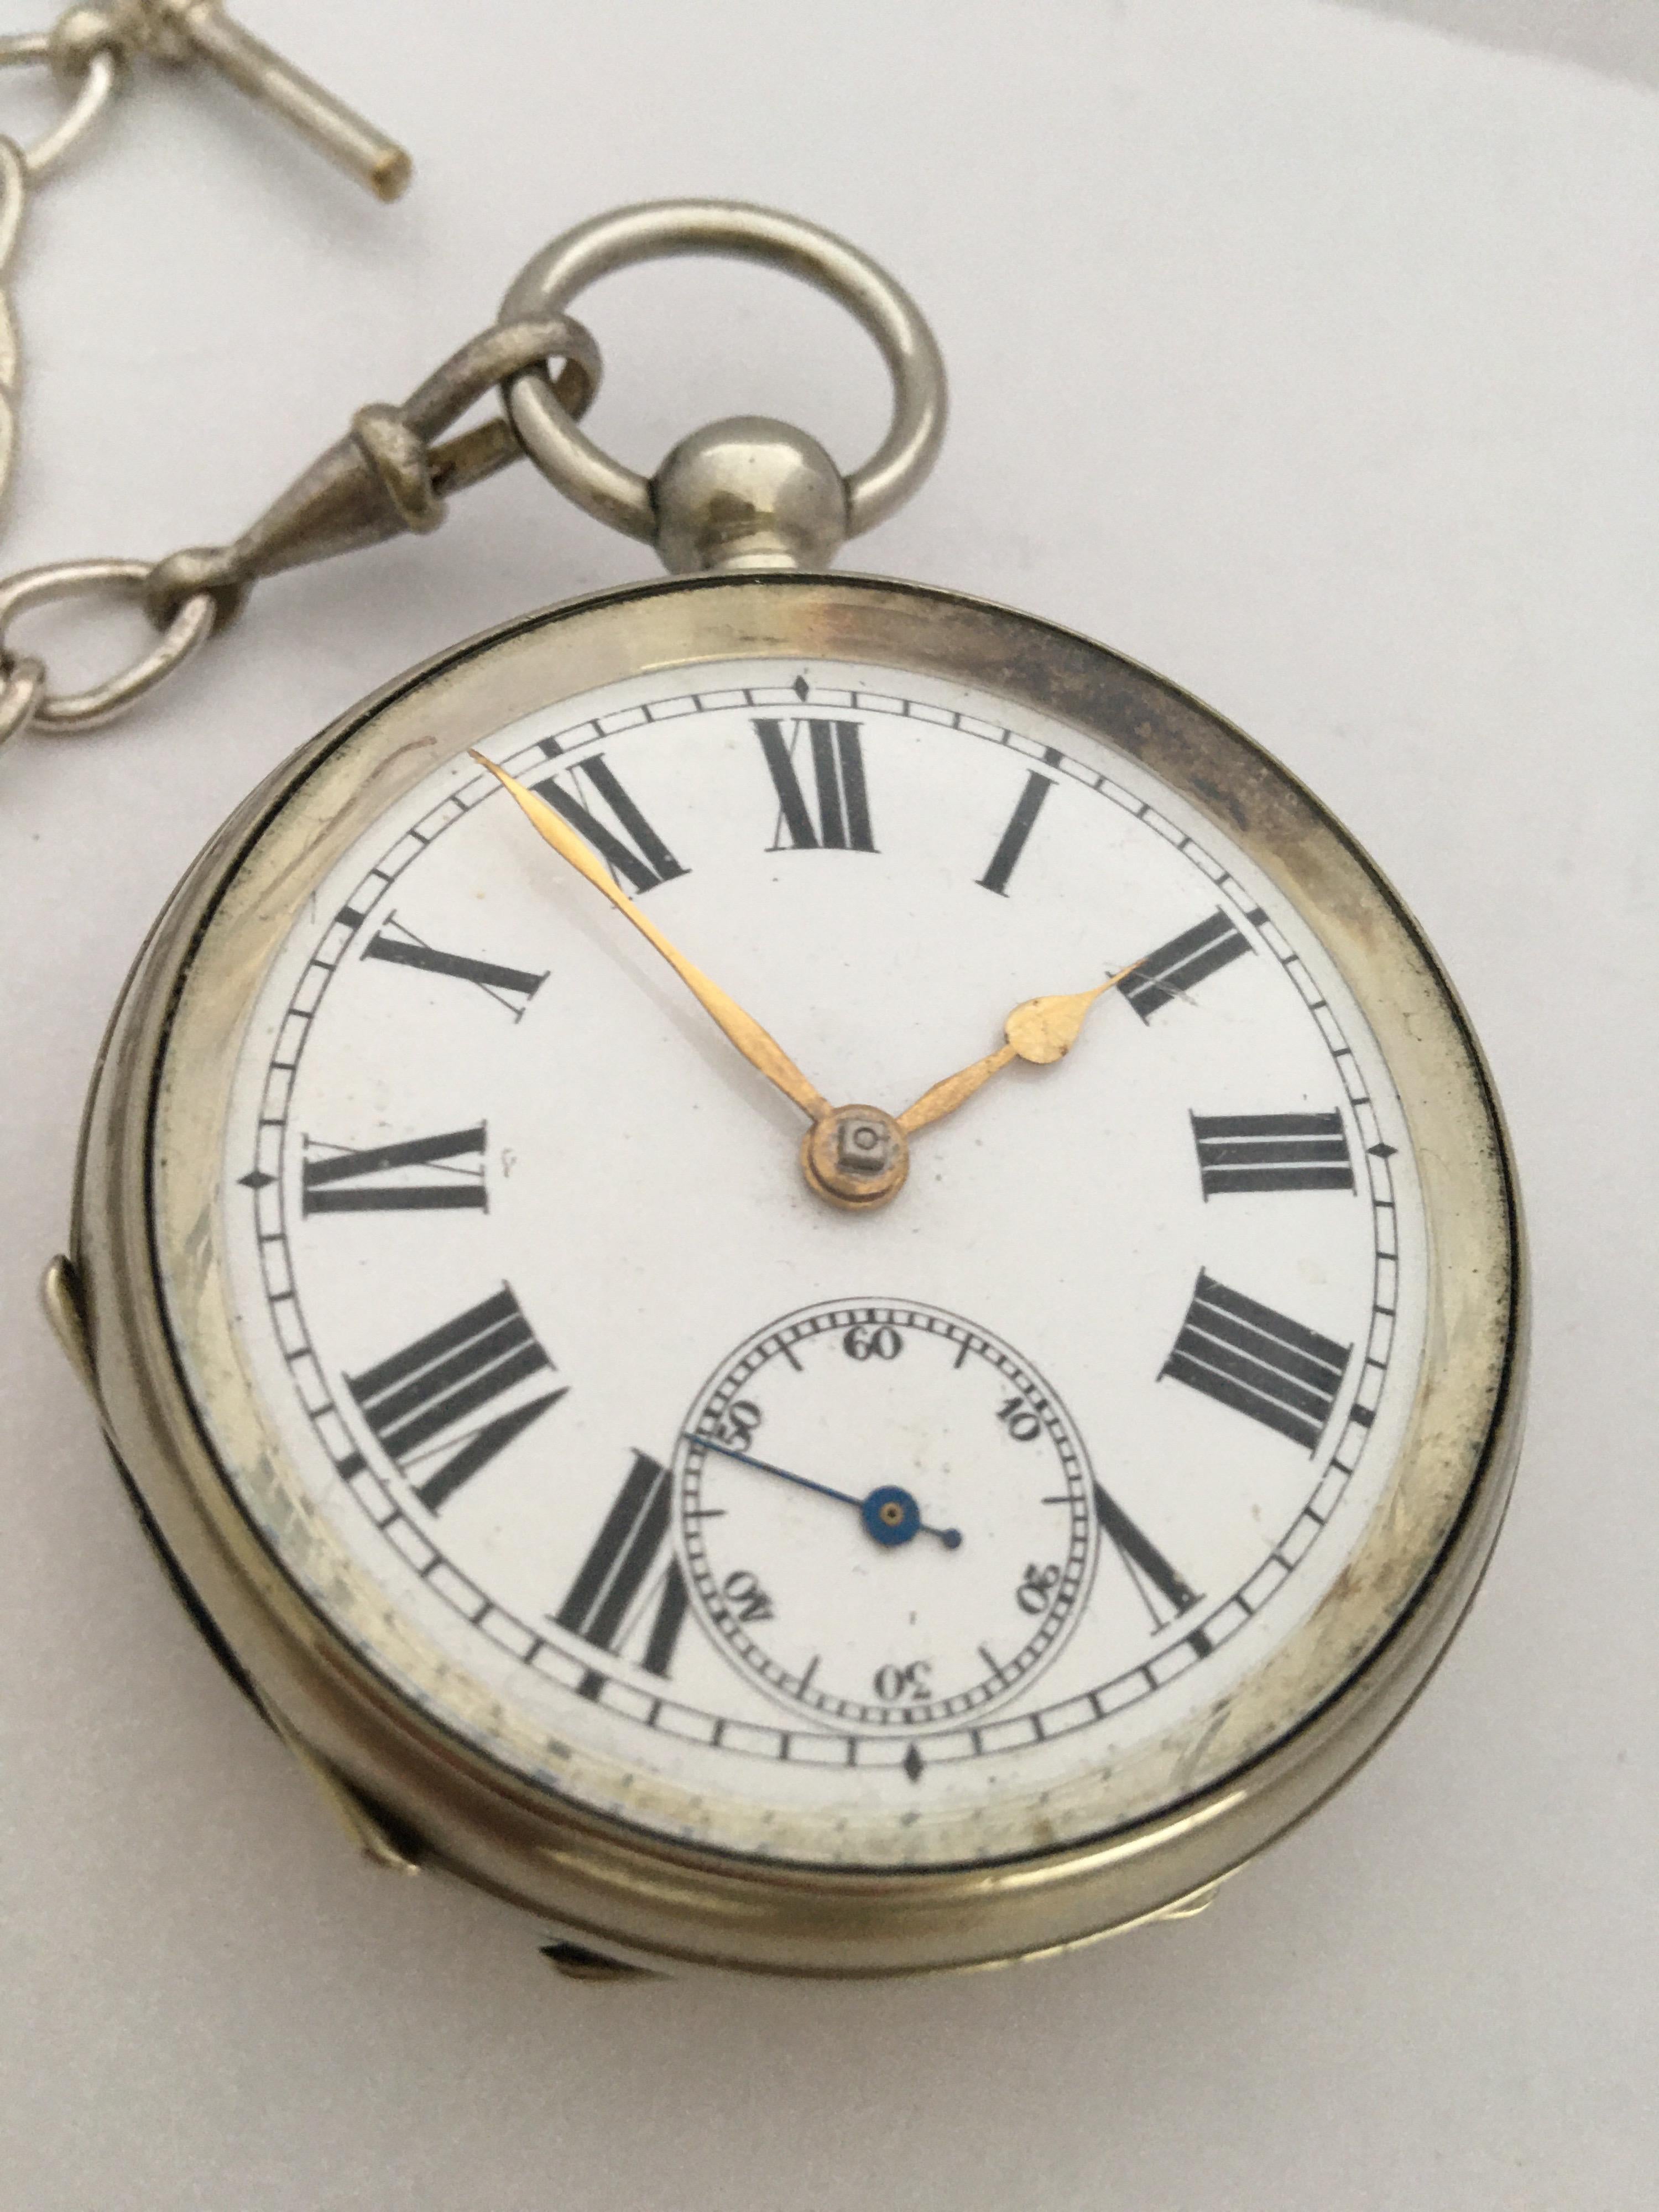 This charming silver plated pocket watch is in good working condition and it ticks nicely and runs well. Visible signs of ageing and gentle use. It comes with a silver plated pocket watch chain and a winding key .

Please study the images carefully